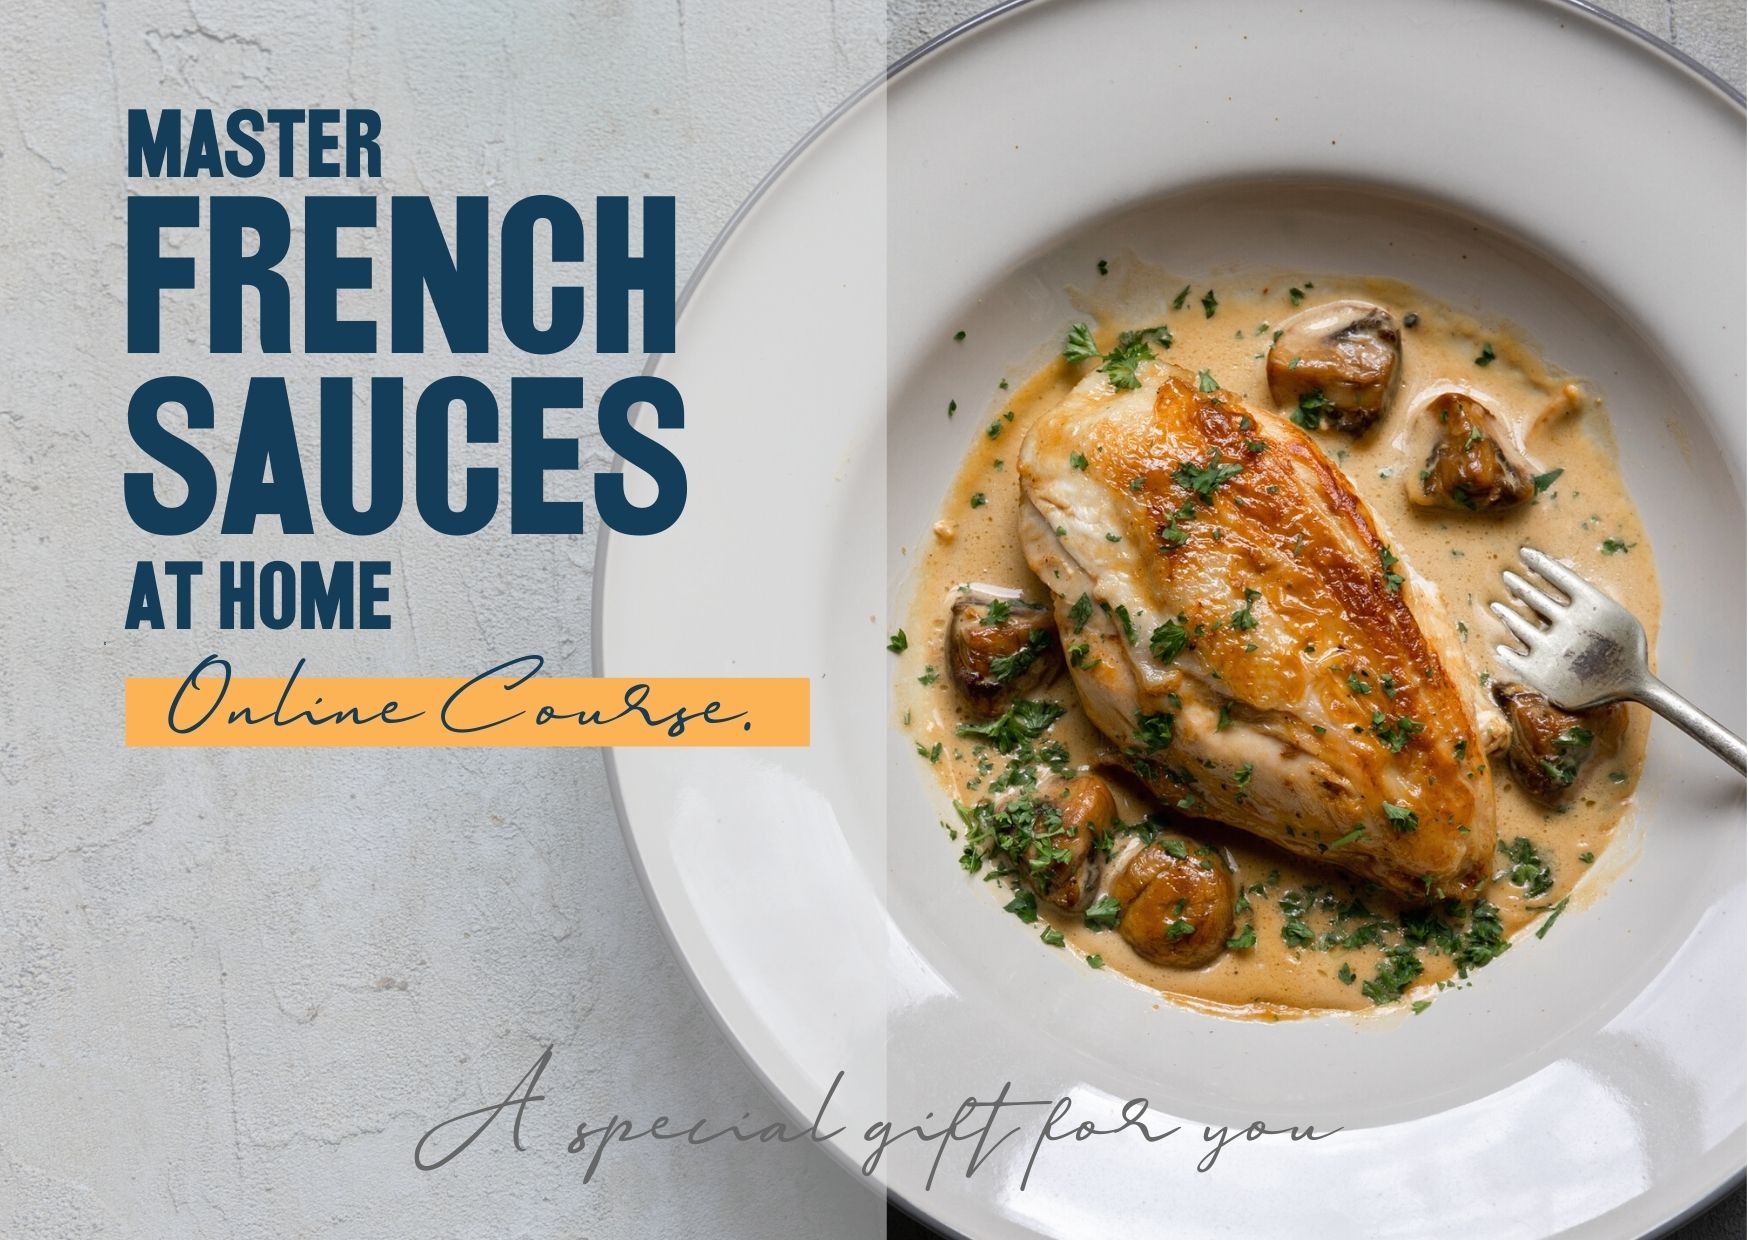 Master French sauces at home gift card